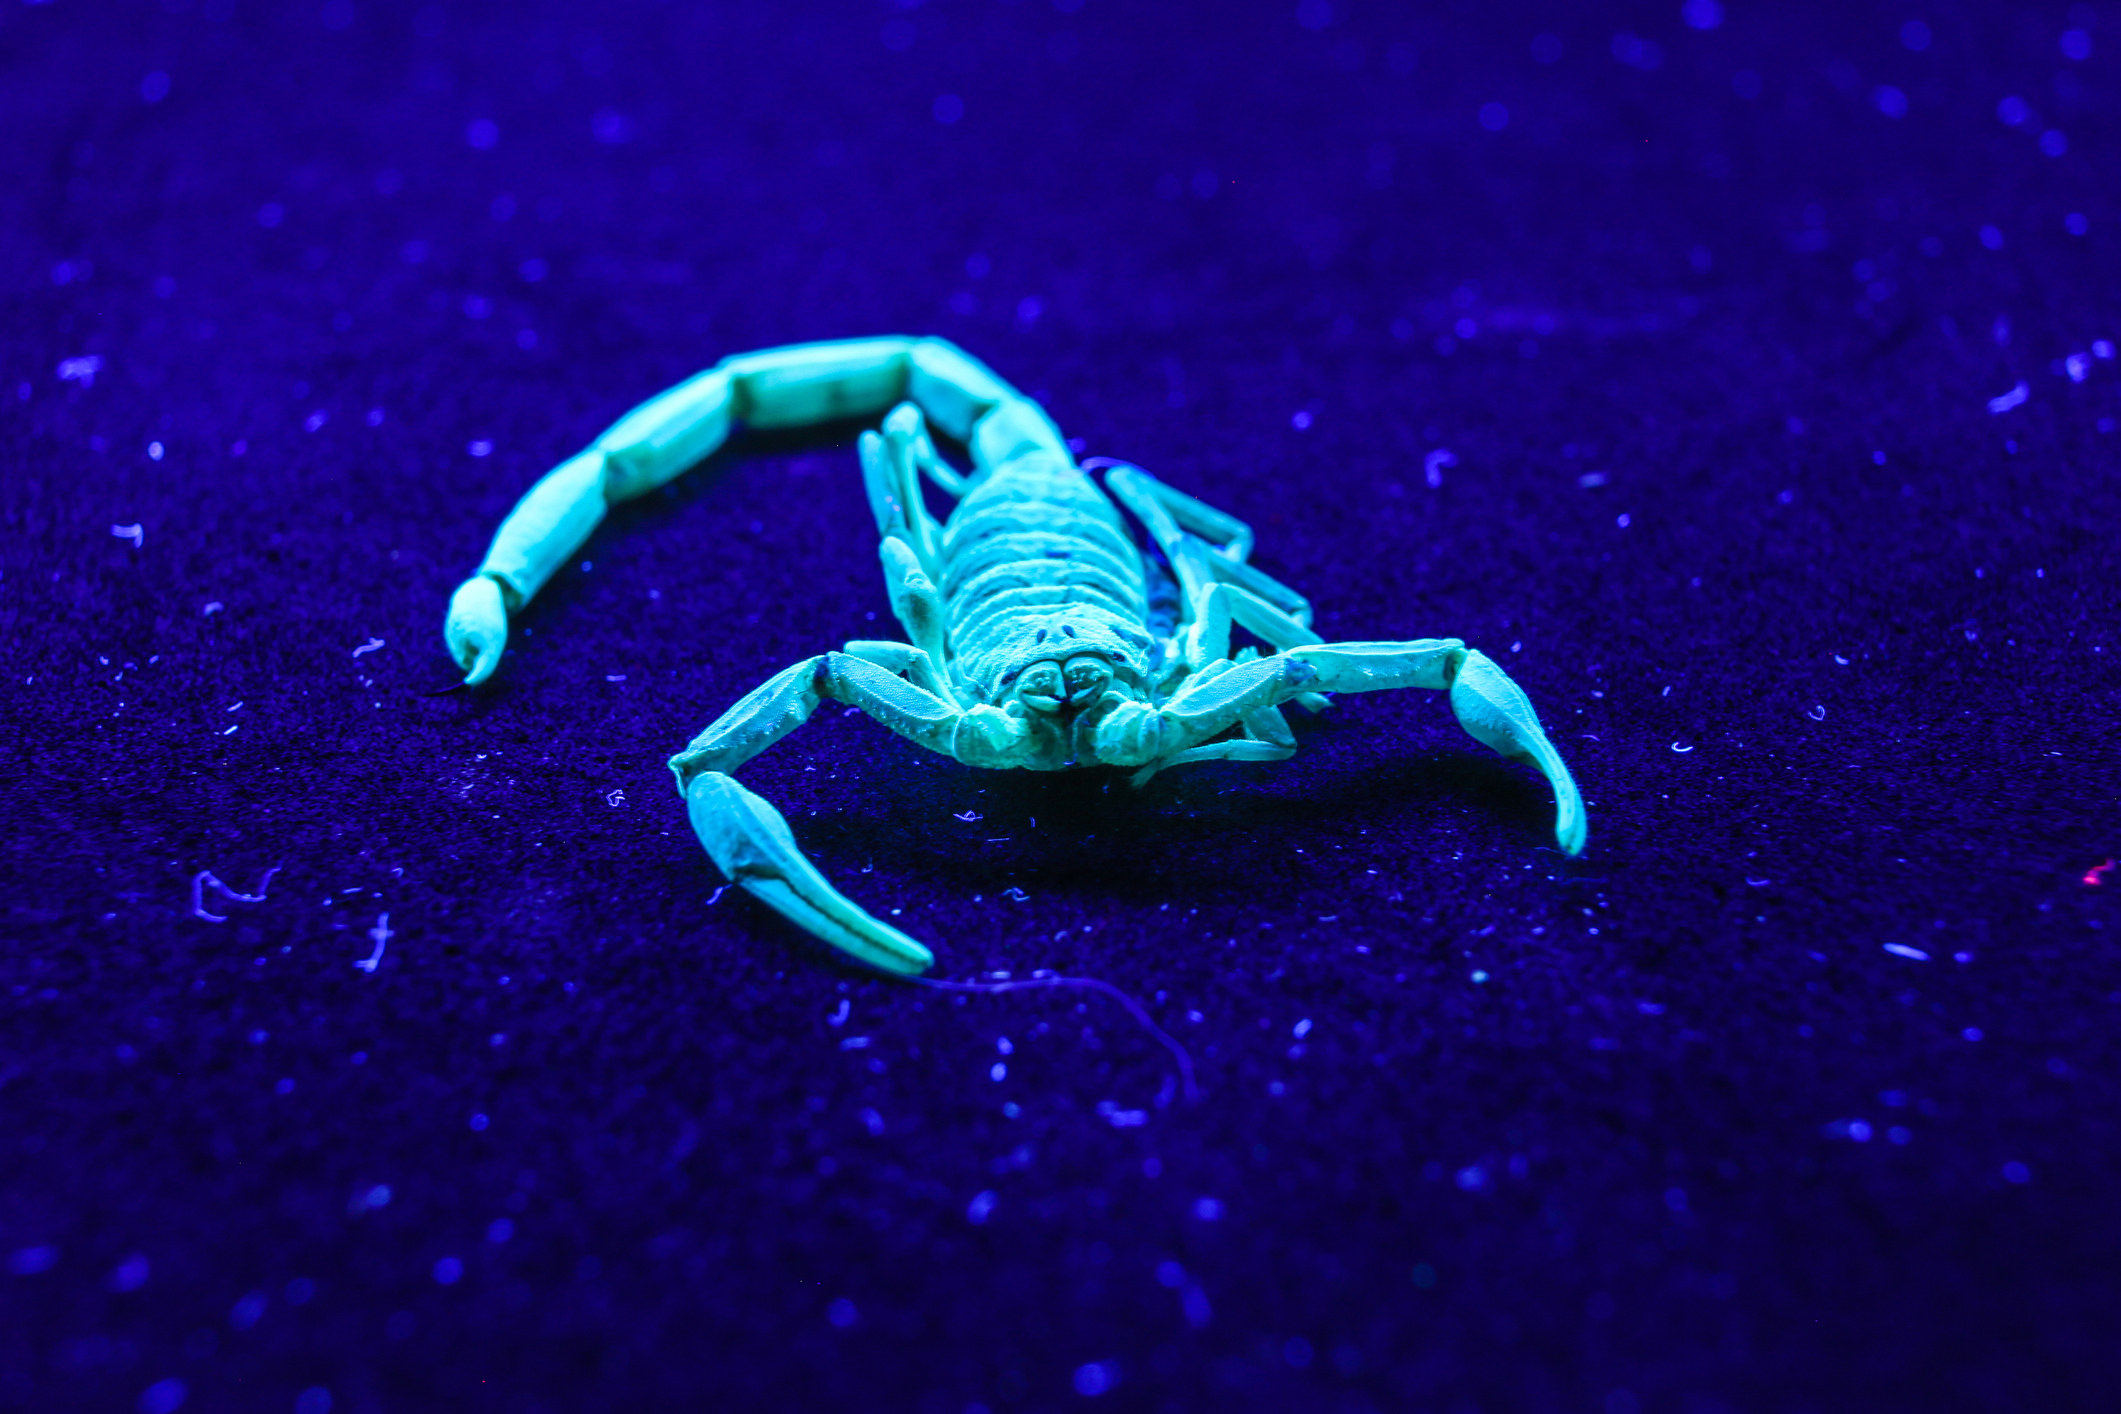 A scorpion that is glowing under ultraviolet lights